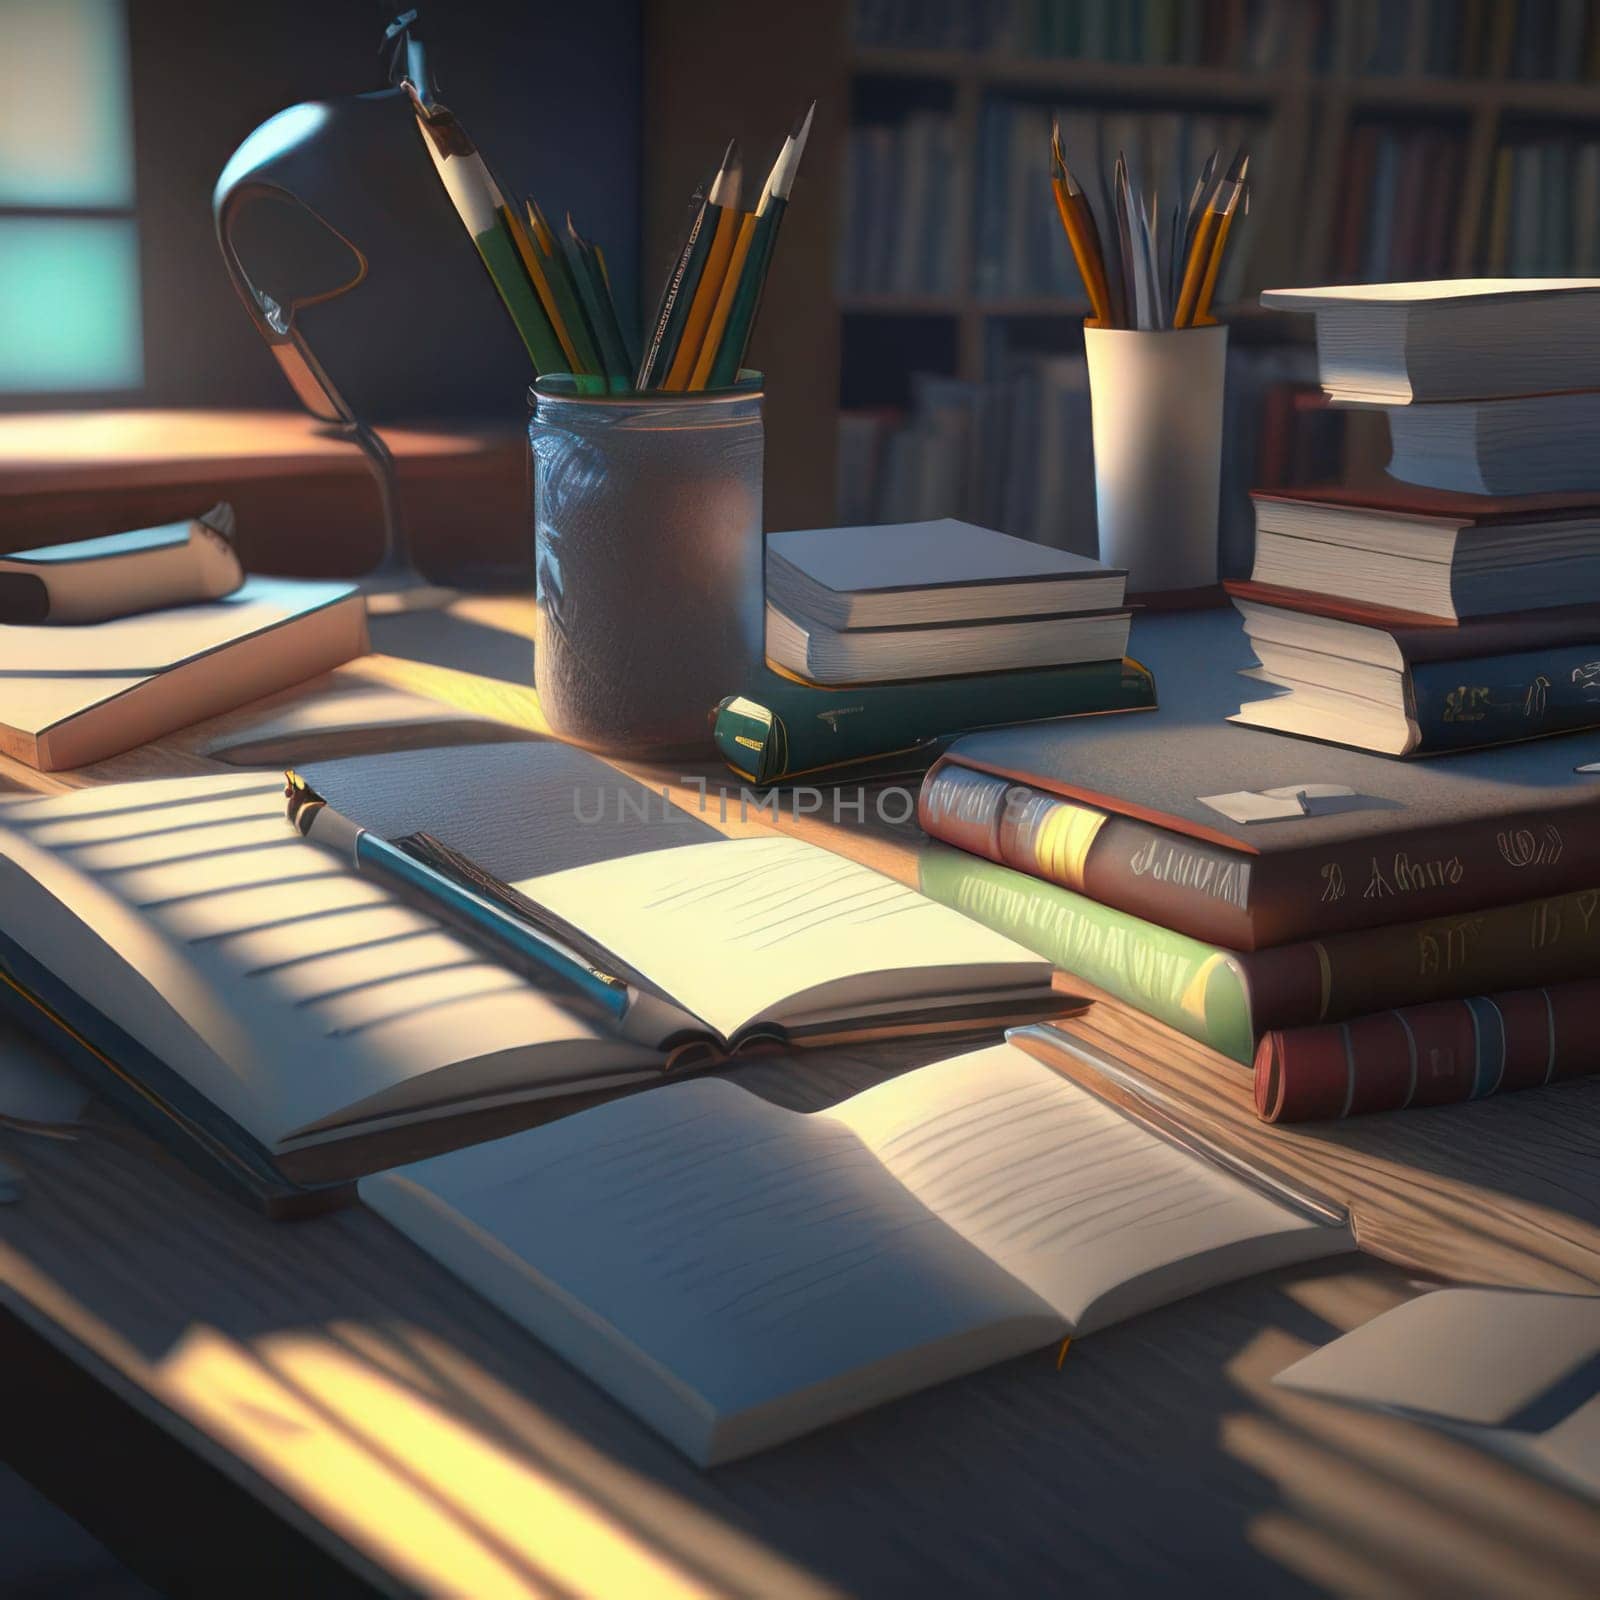 Books on the table. Image created by AI